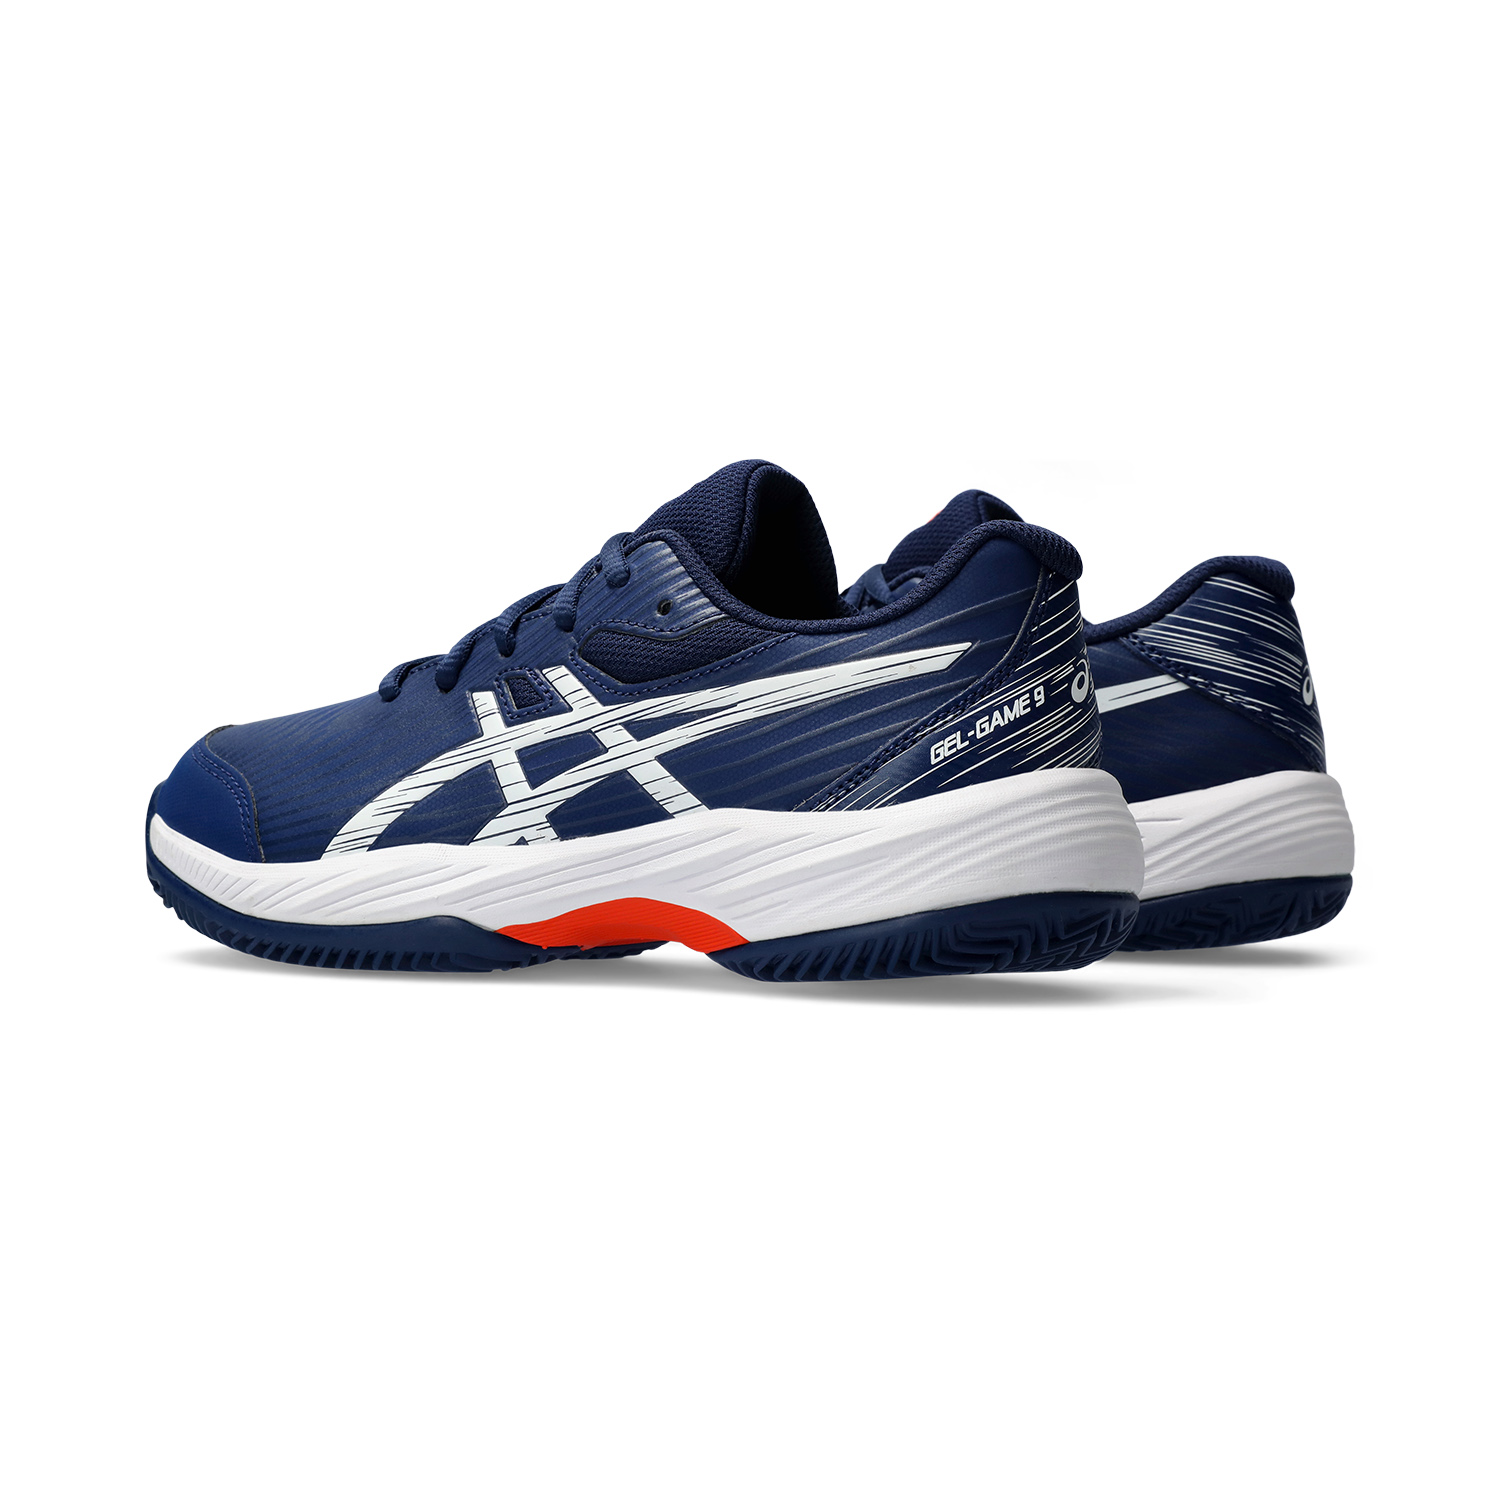 Asics Gel Game 9 GS Clay/OC Bambini - Blue Expanse/Pure Silver